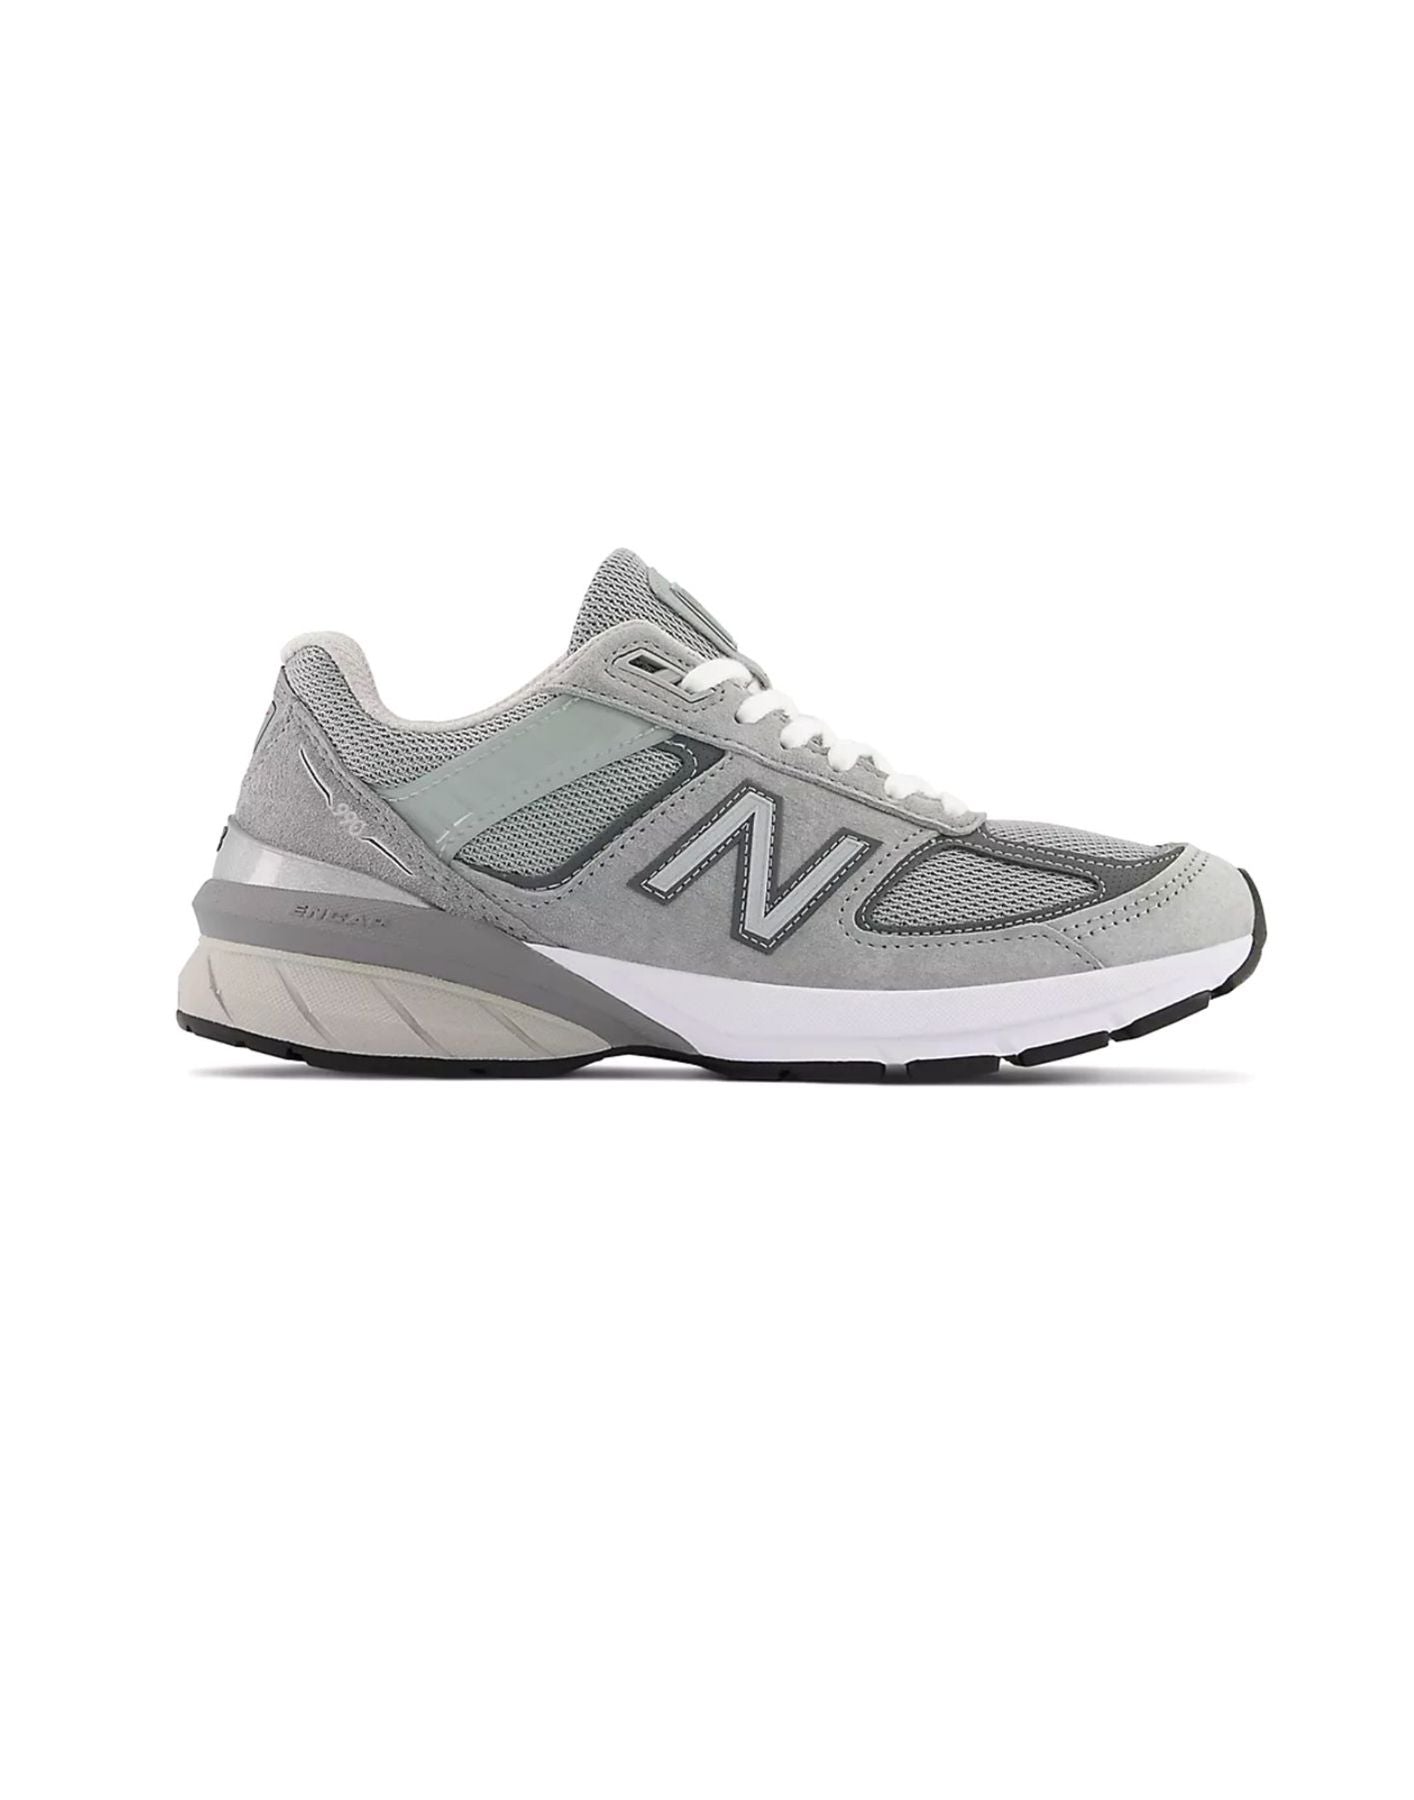 Shoes for man M990GL5 NEW BALANCE